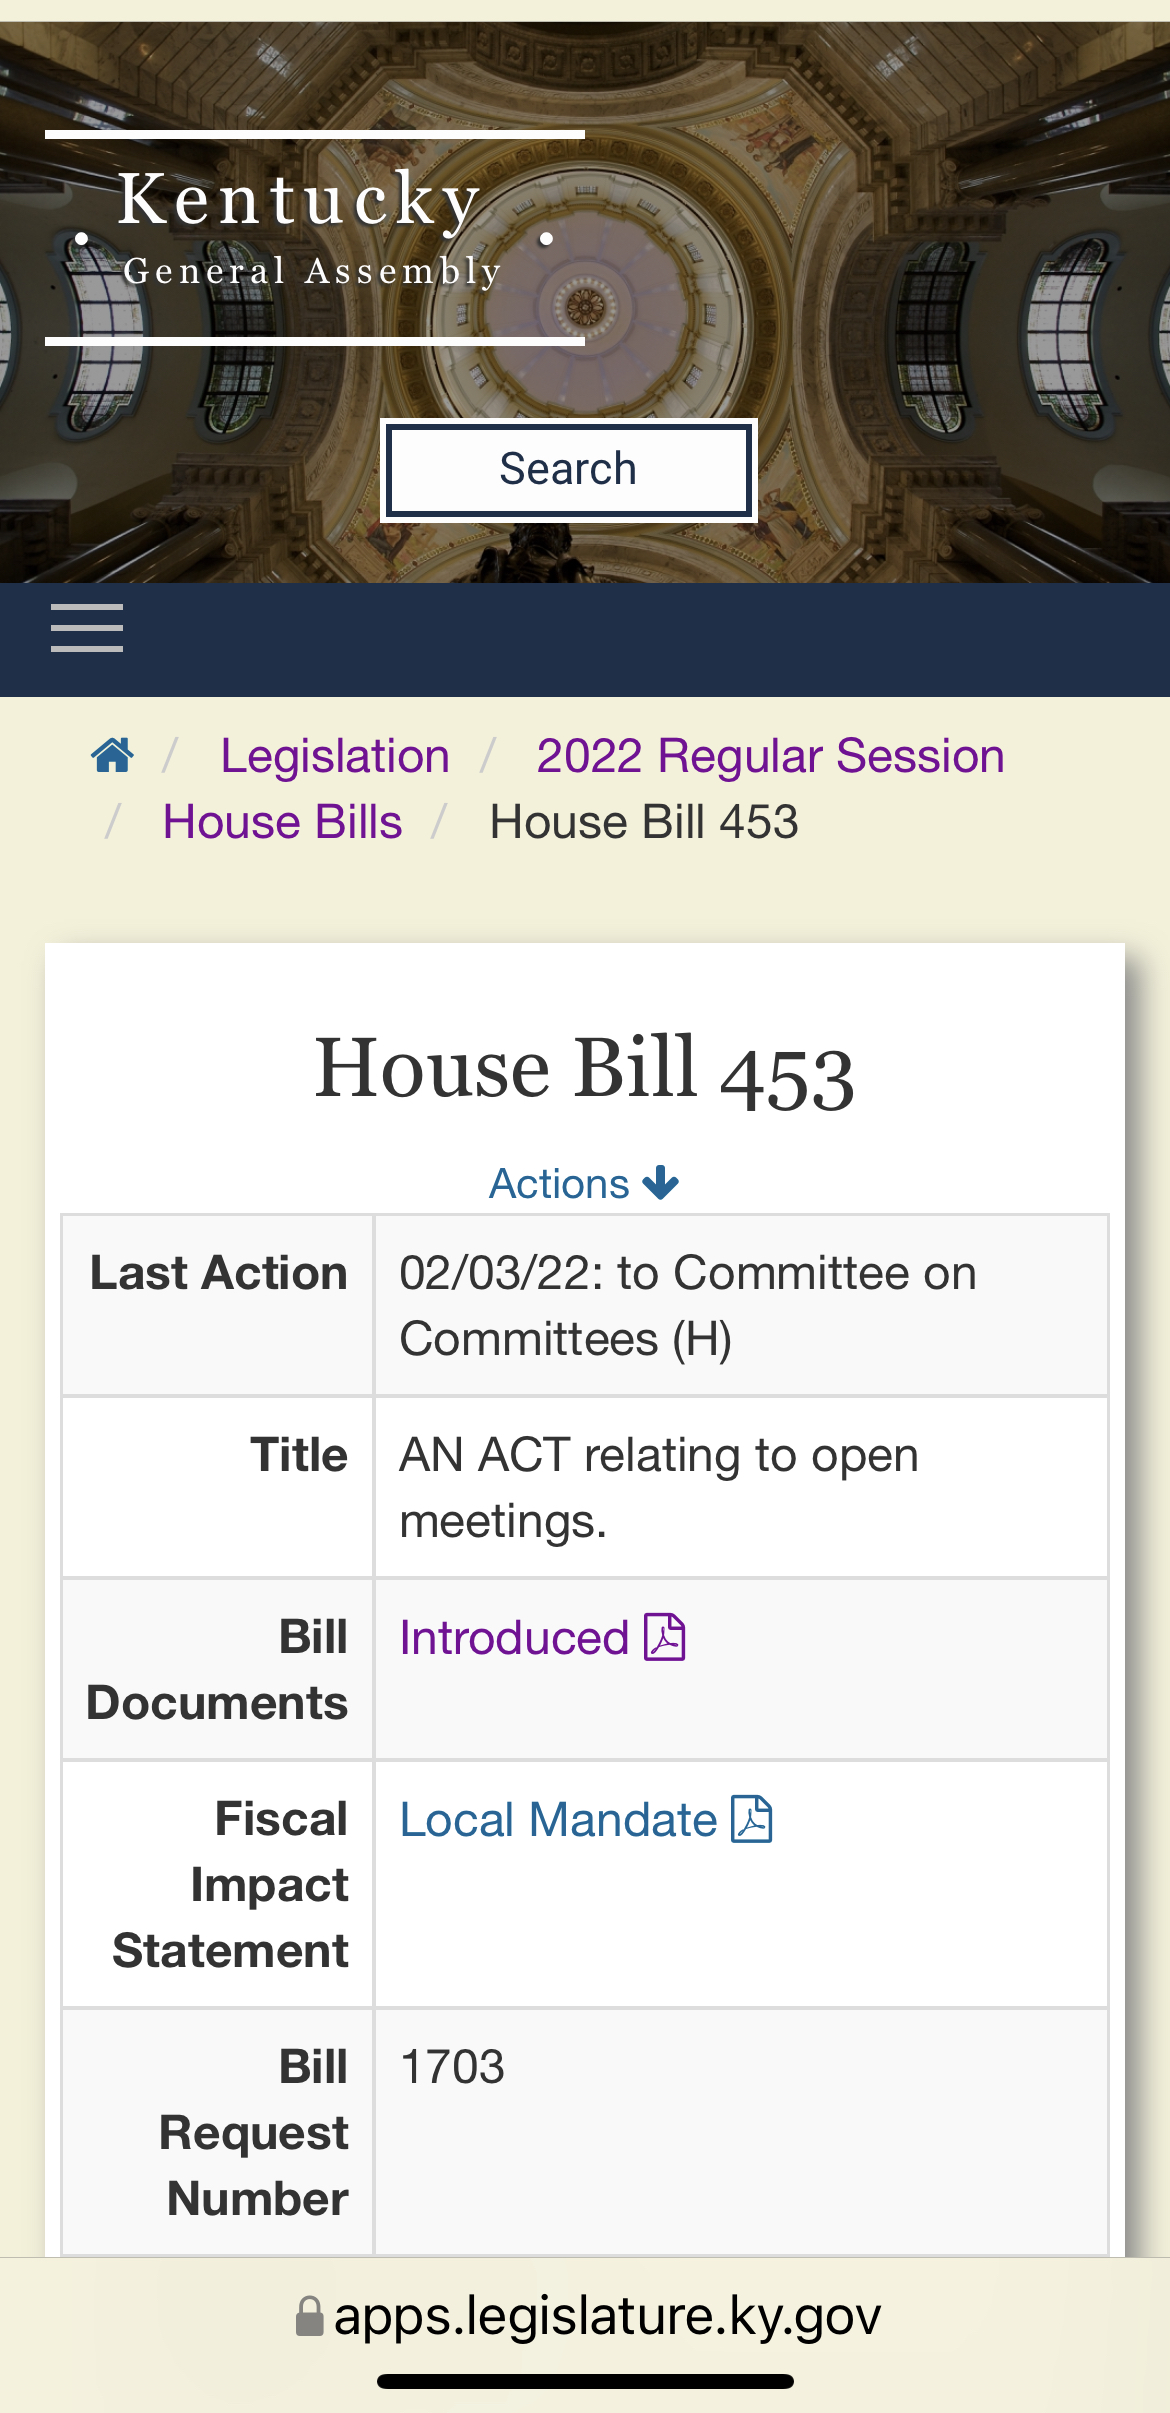 HB 453 amends the open meetings law.